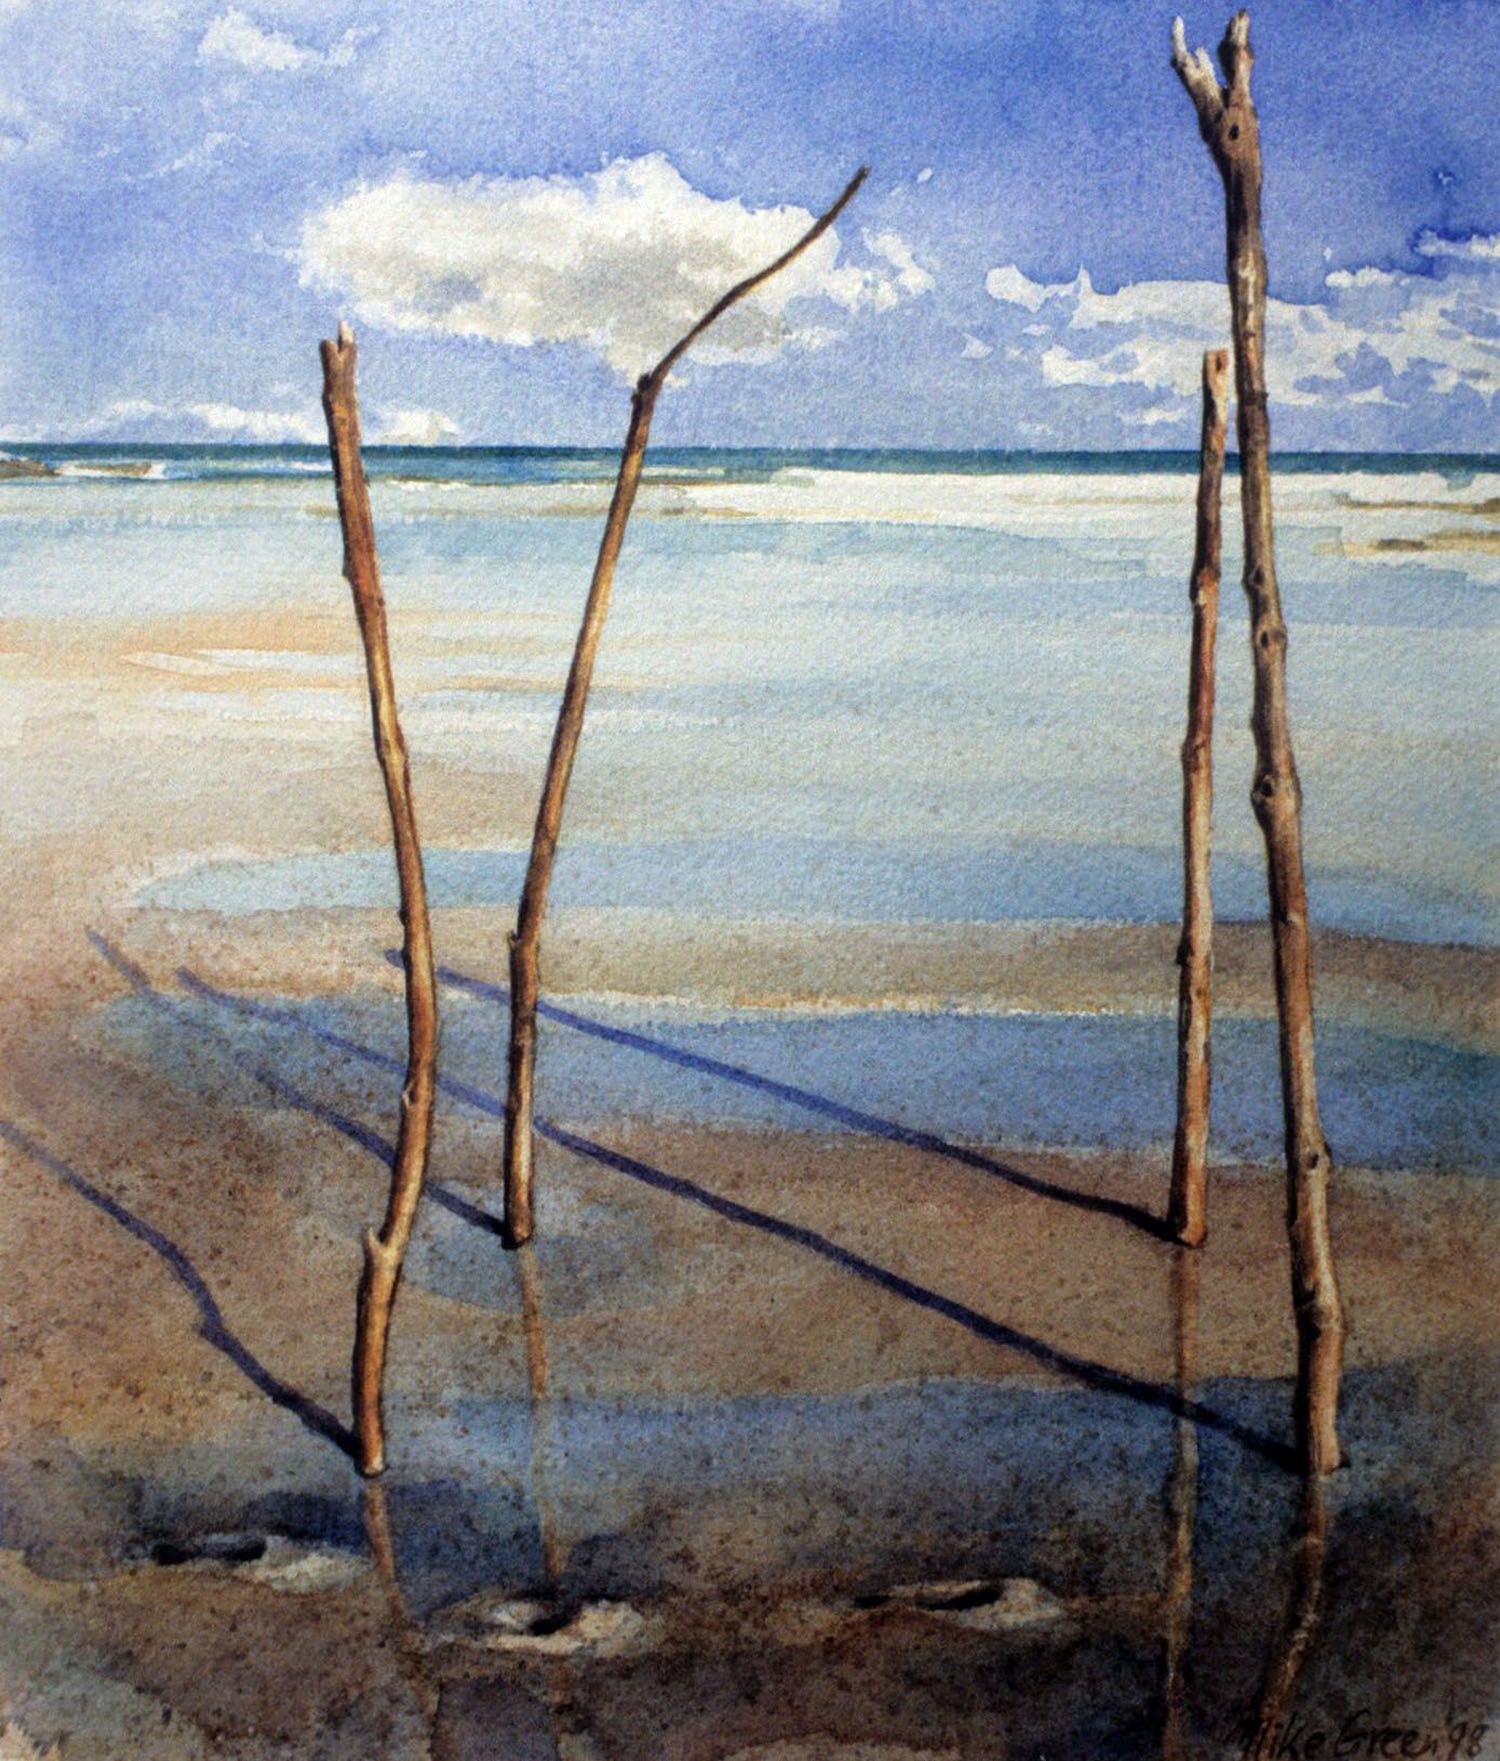 "The Claim" ( sticks with ocean view) 1997. Watercolour on 300gms Arches paper.33 x 27cm